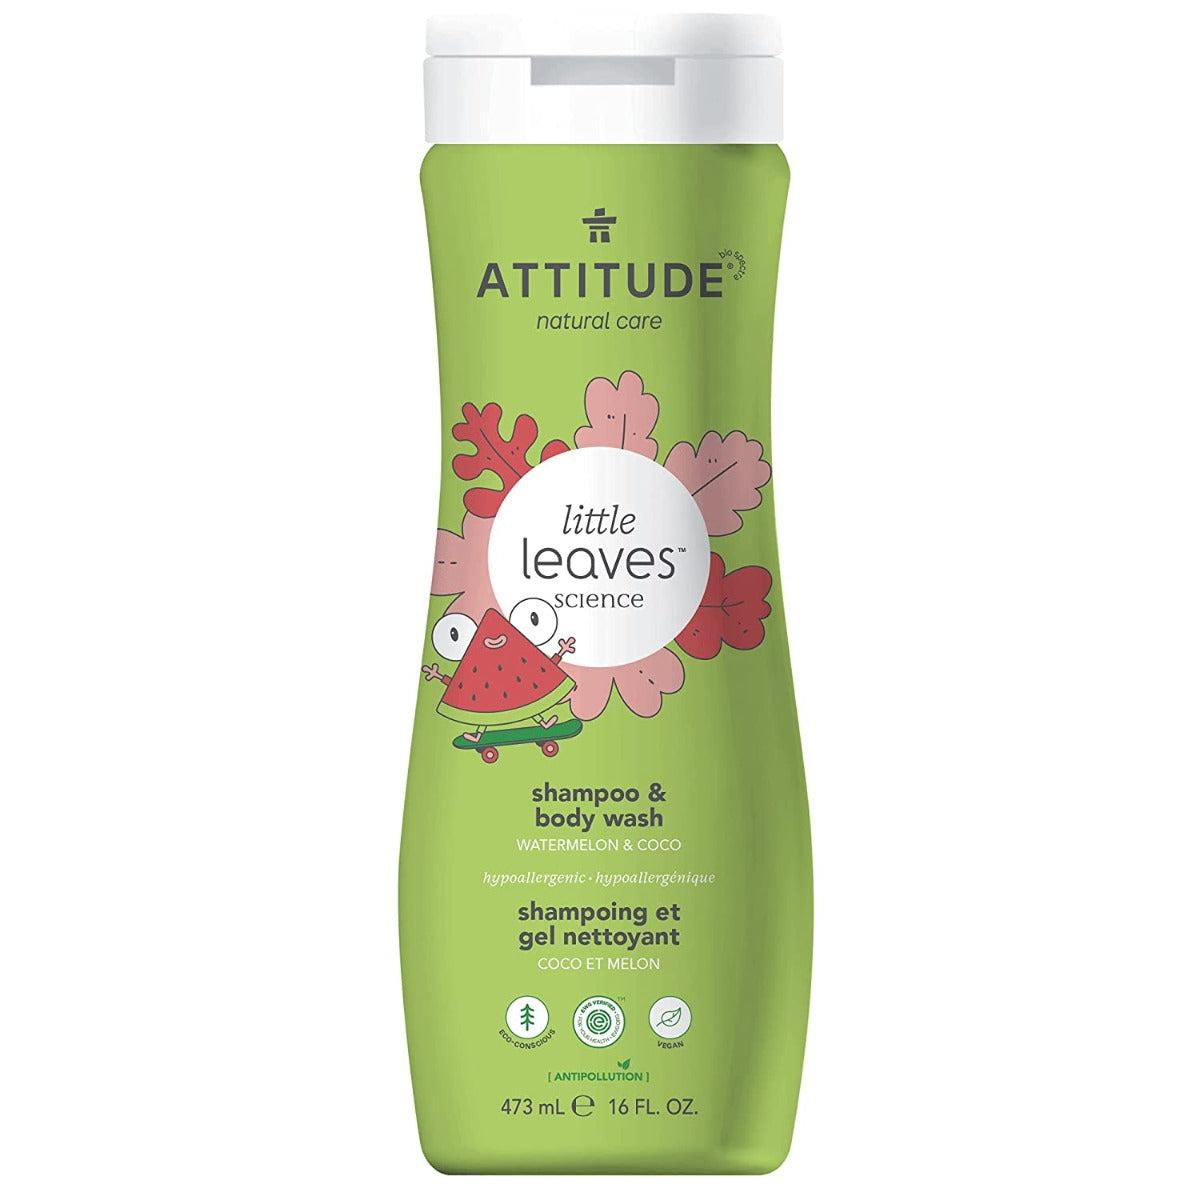 Attitude little leaves Shampoo and Body Wash 2-in-1 for kids 2 yrs and up Sulfate Free Watermelon & Coco 473ml